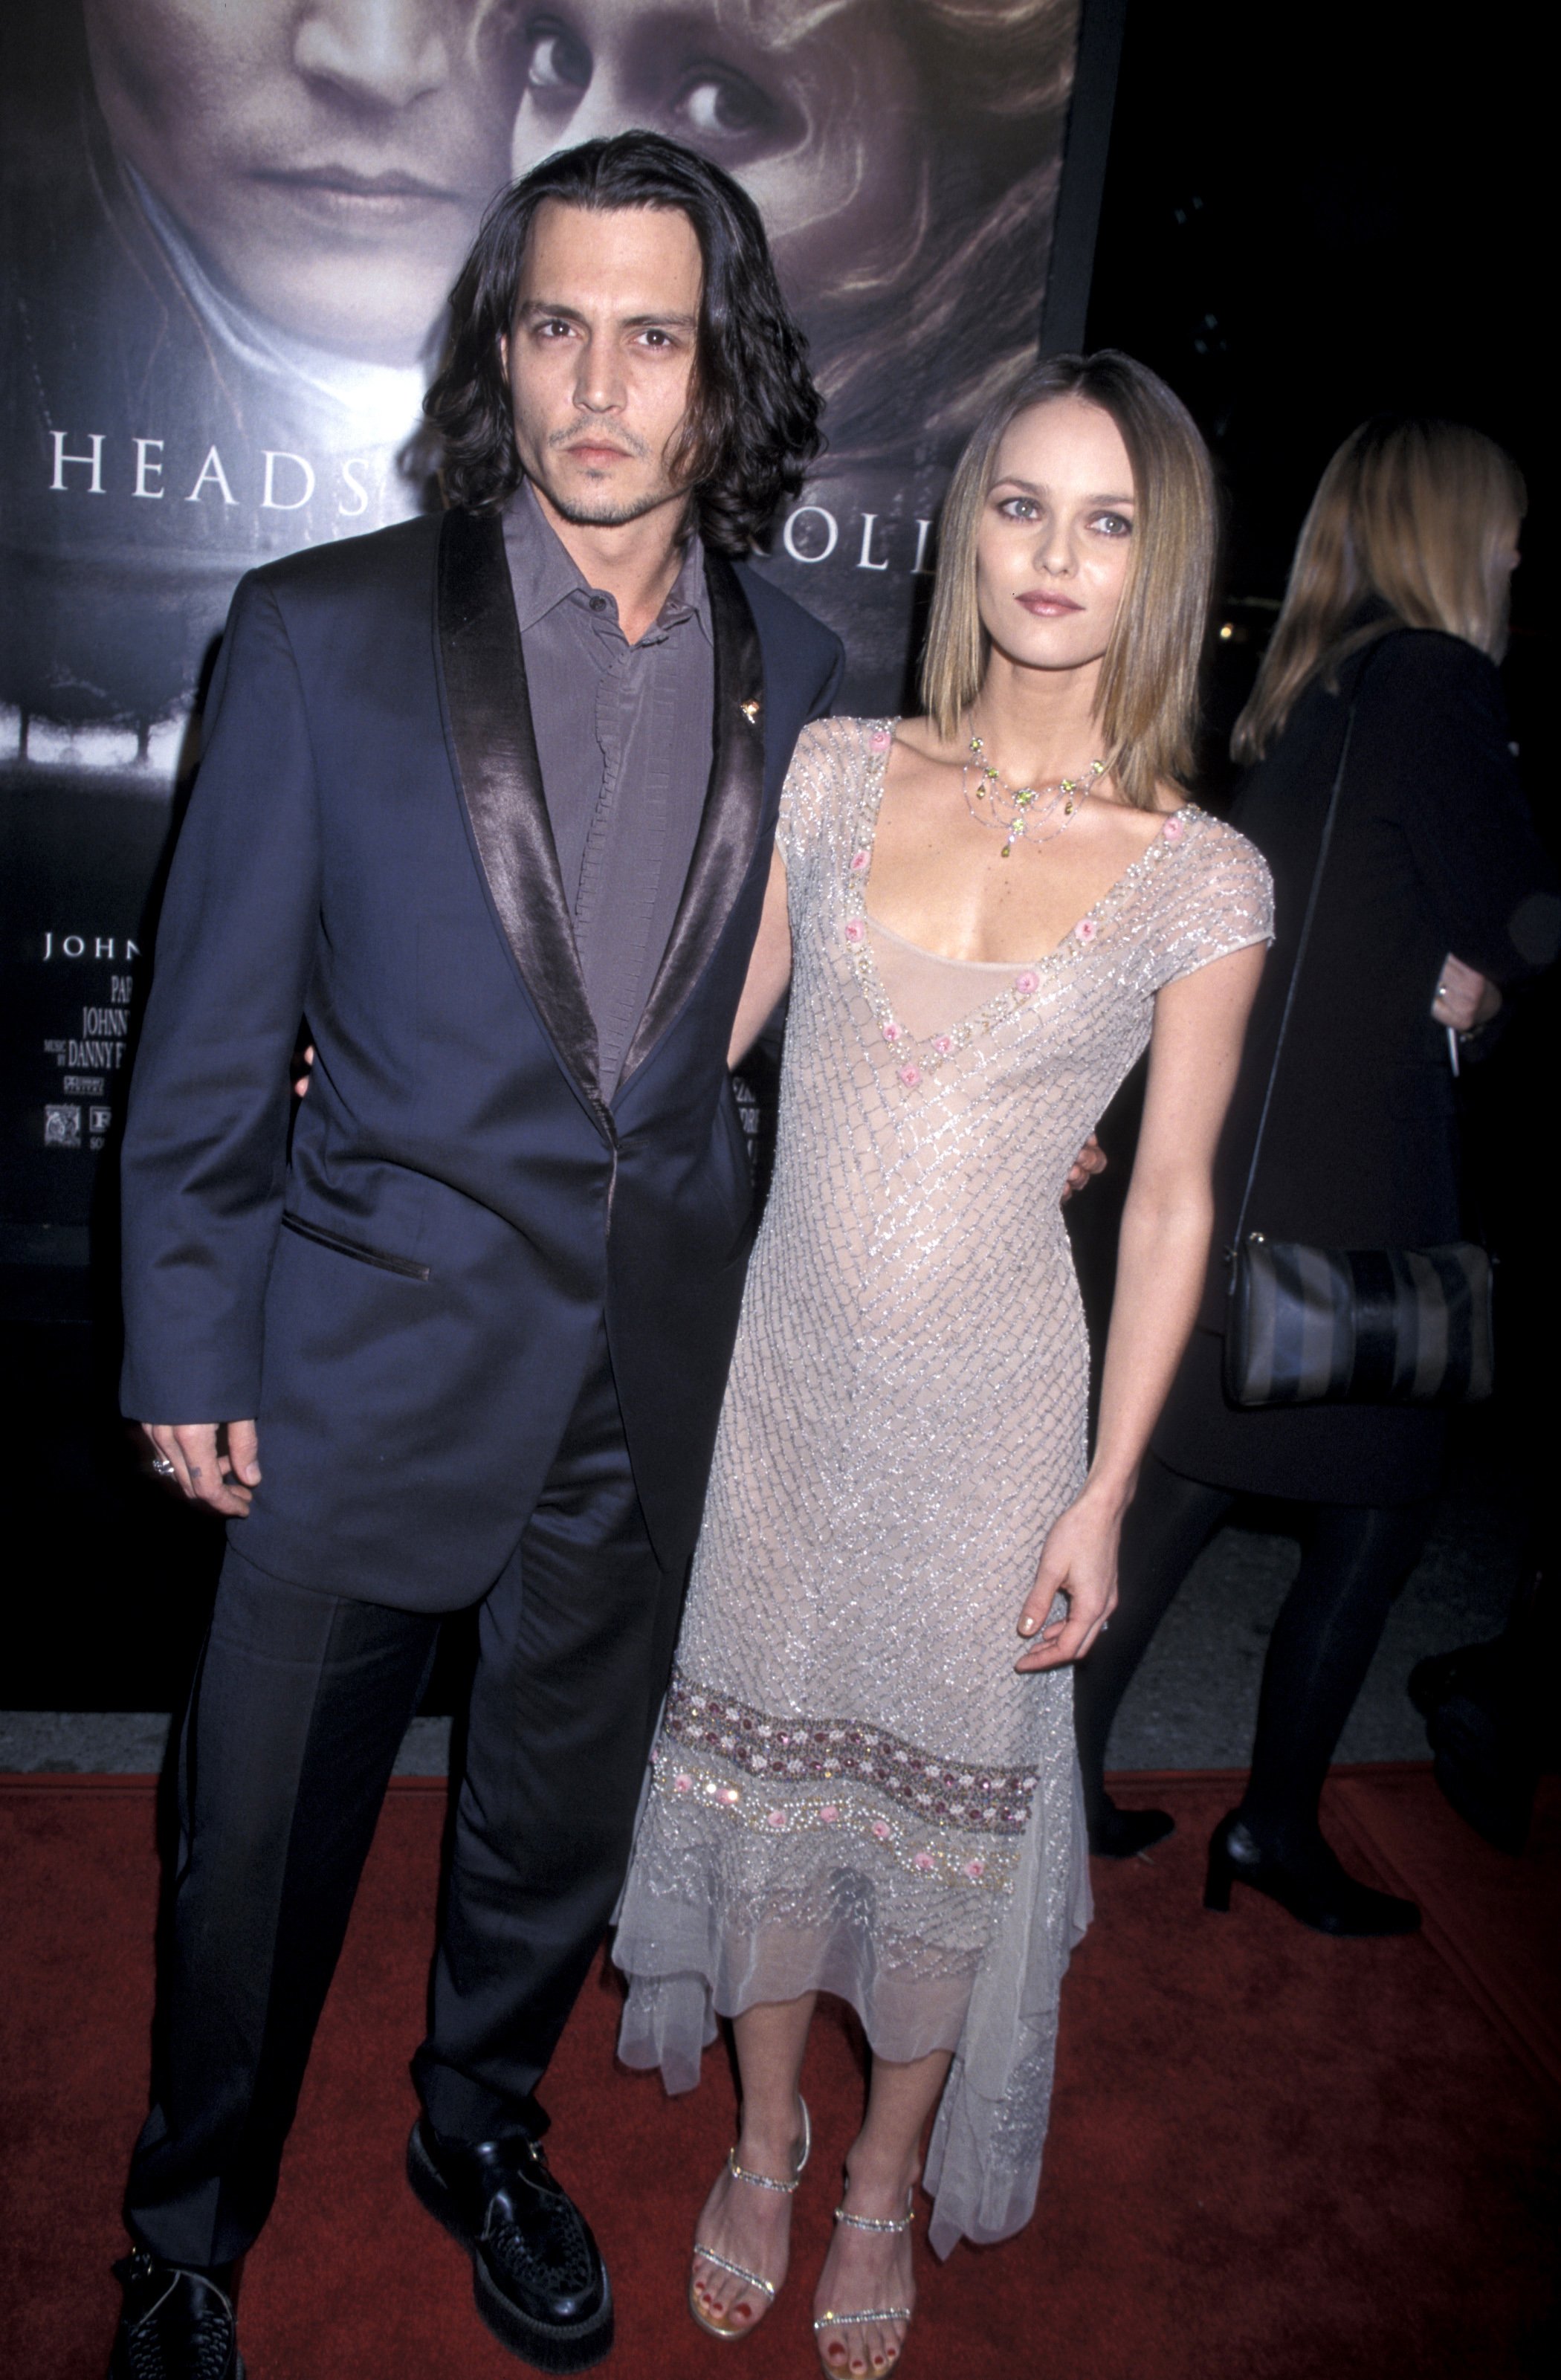 Johnny Depp and Vanessa Paradis at the premiere of "Sleepy Hollow" on November 17, 1999. | Source: Ron Galella/Ron Galella Collection/Getty Images